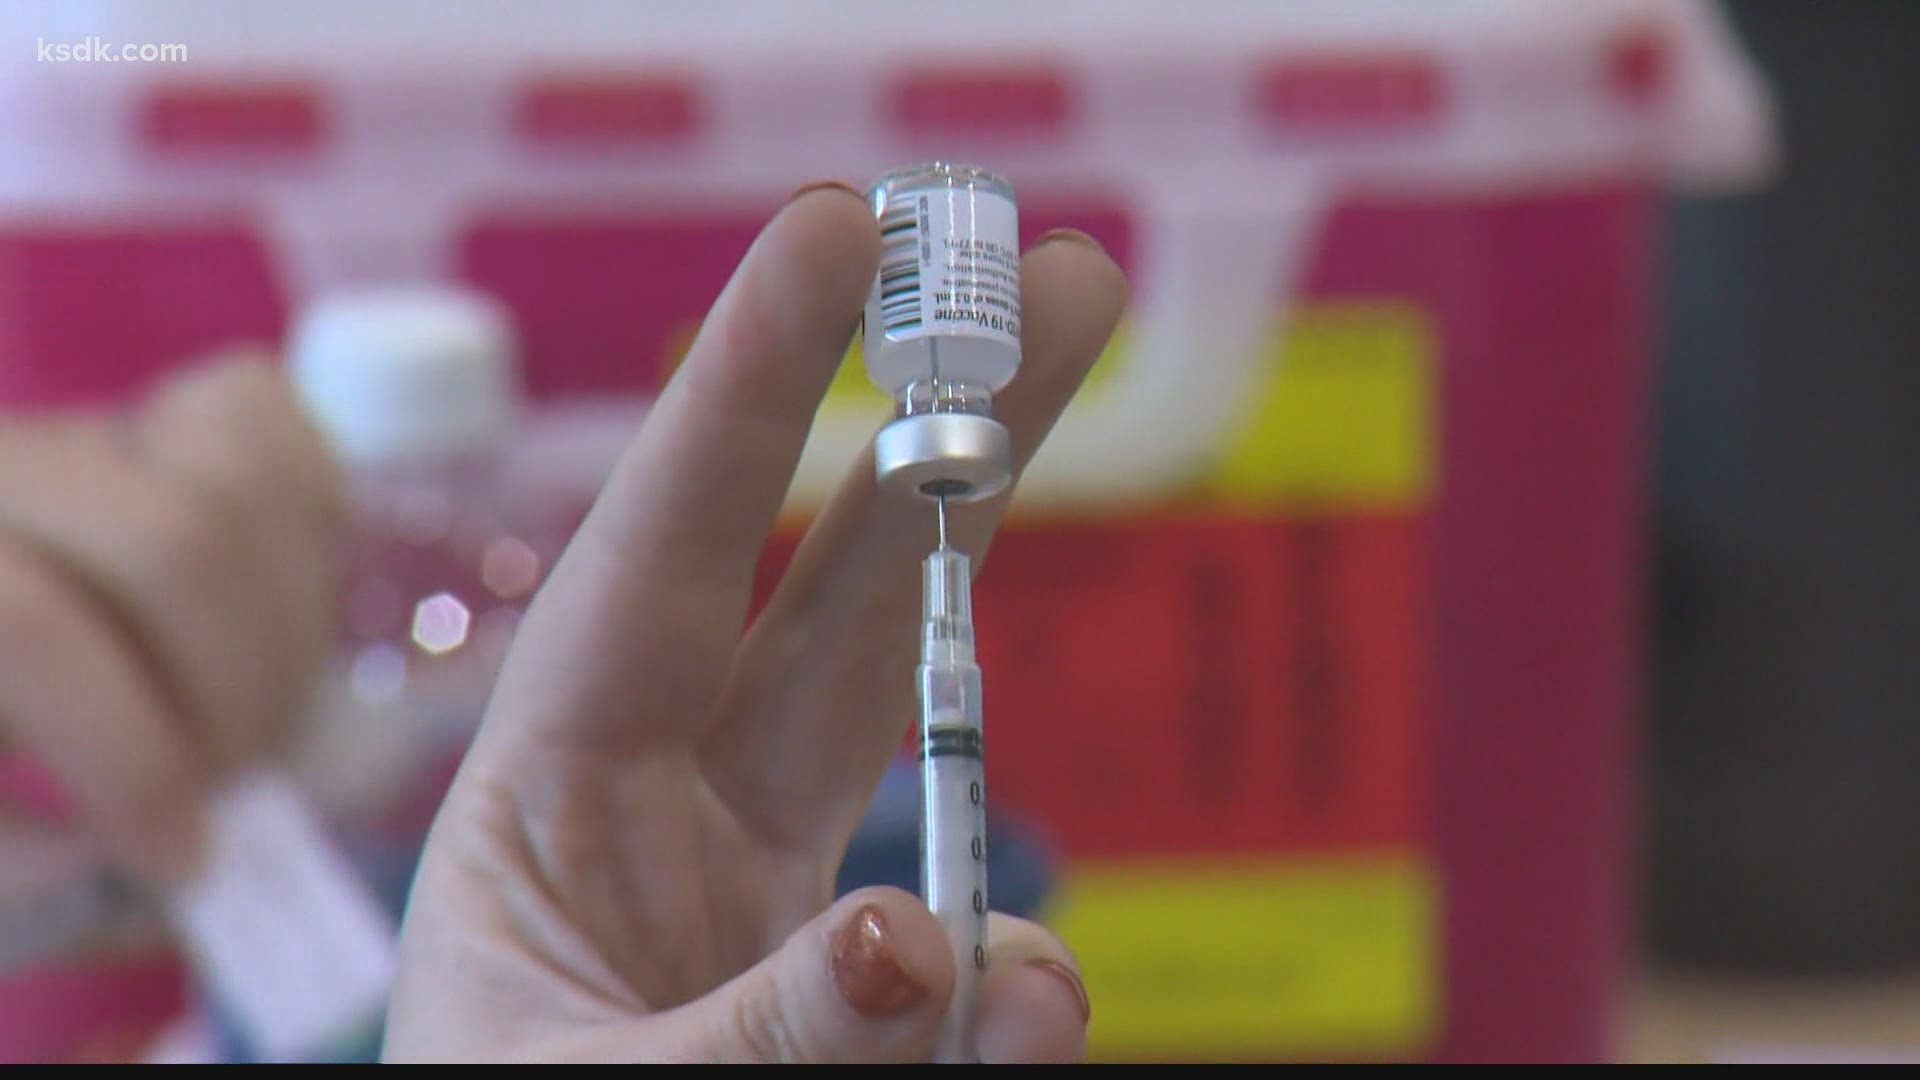 It takes five weeks for people to be fully vaccinated according to doctors. That means the deadline for many is days away.